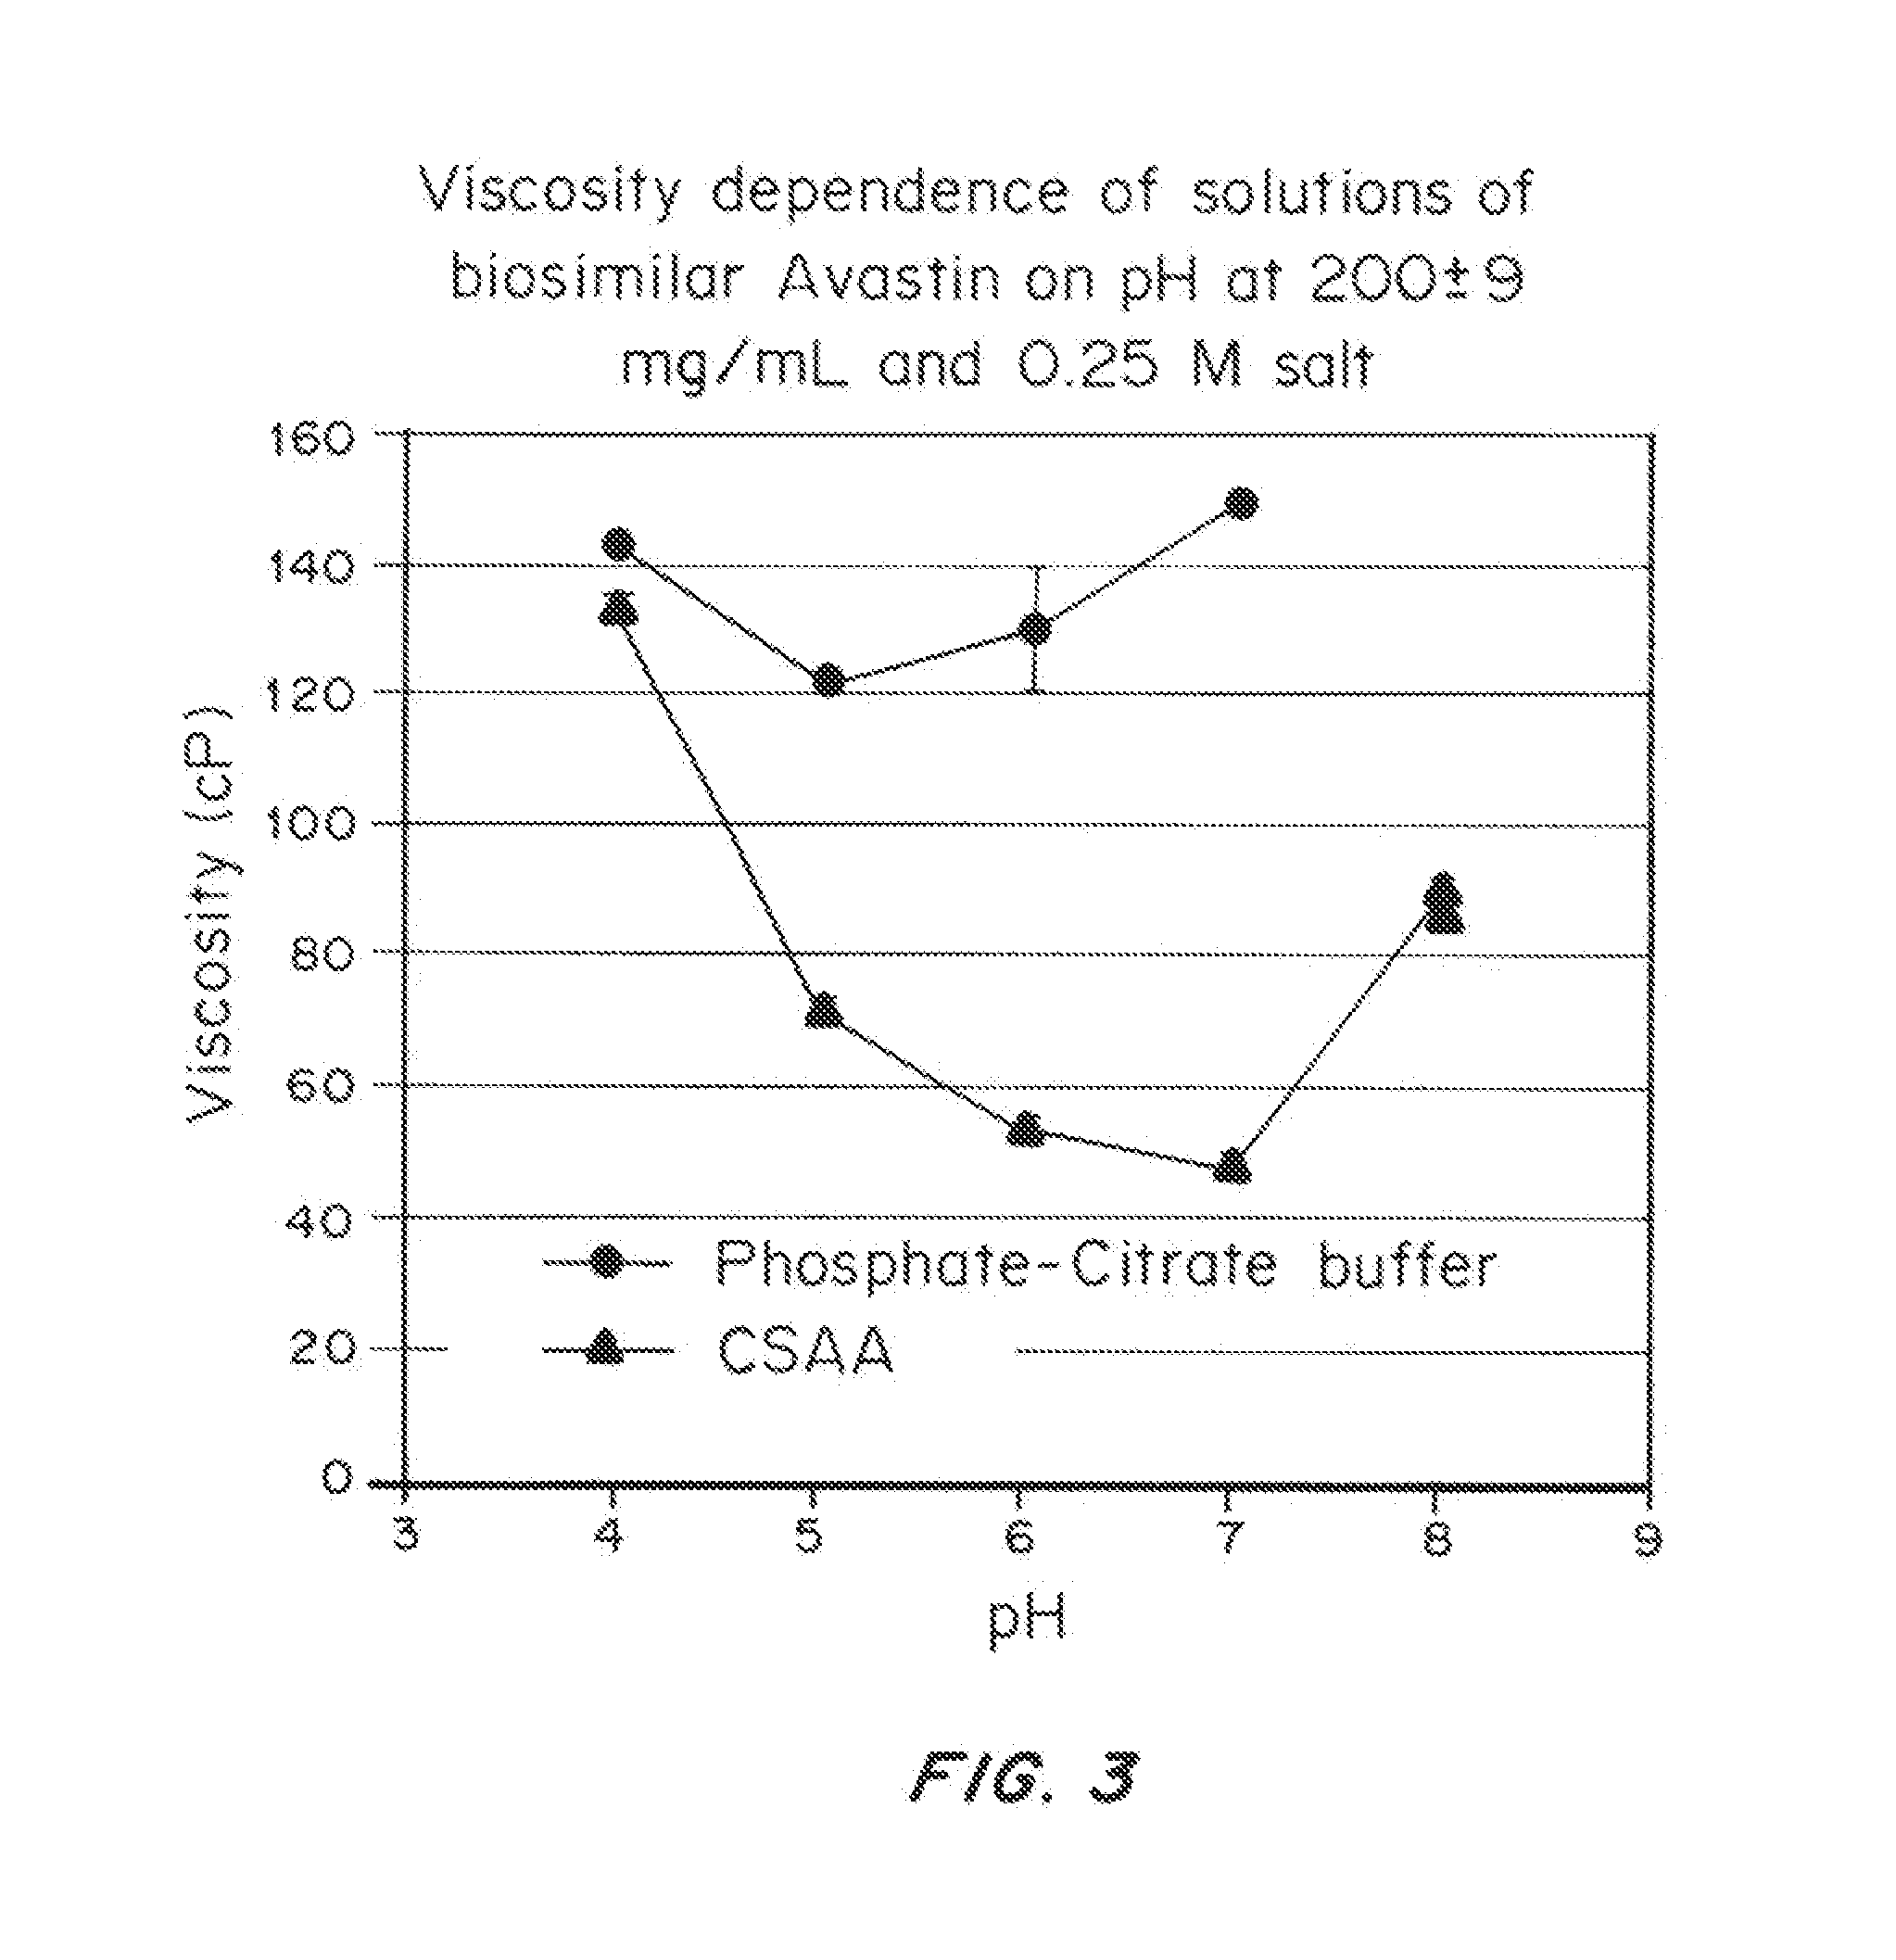 Liquid protein formulations containing viscosity-lowering agents